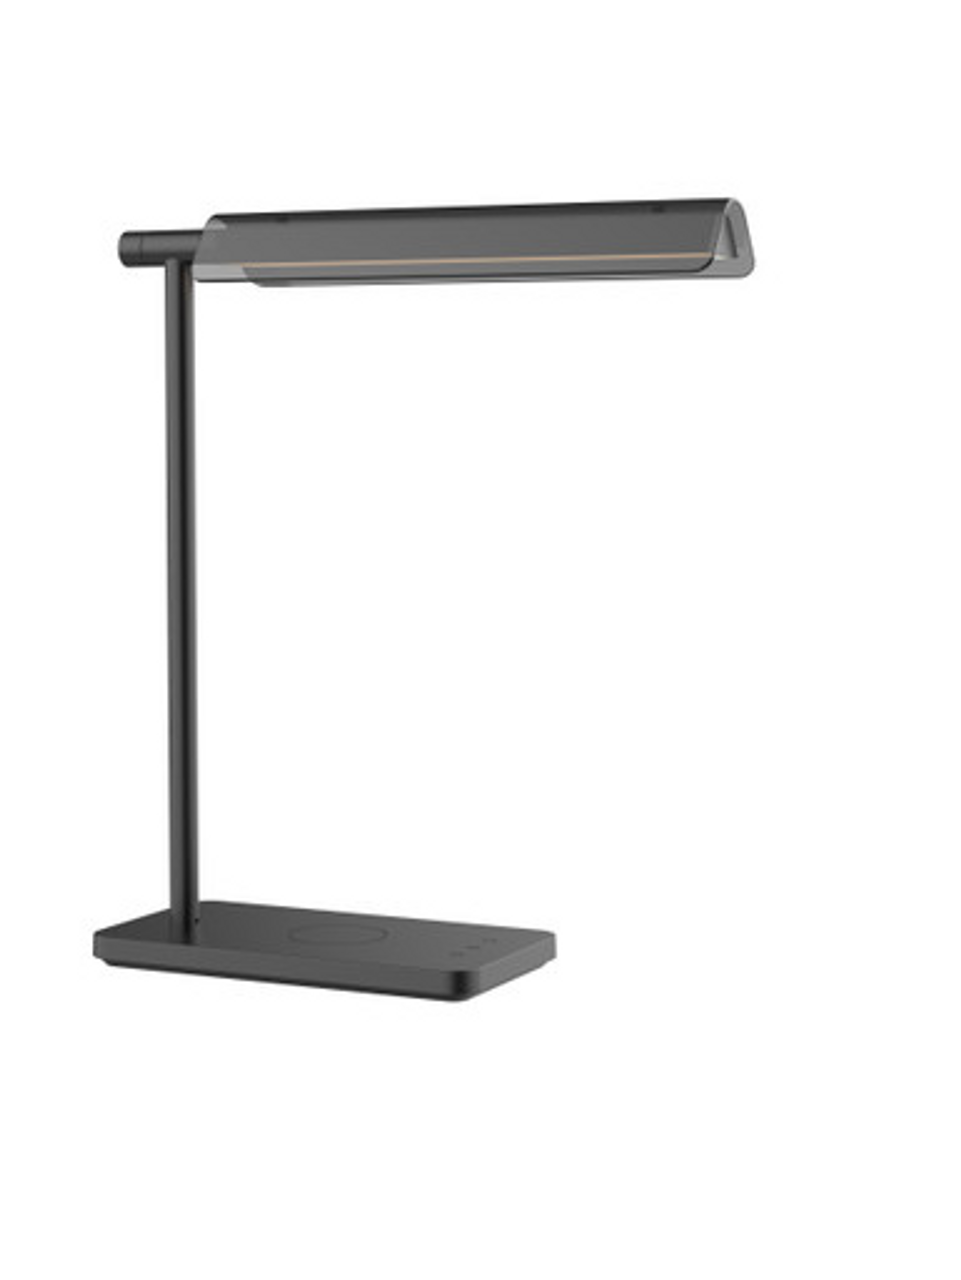 Black table lamp with rotational light source